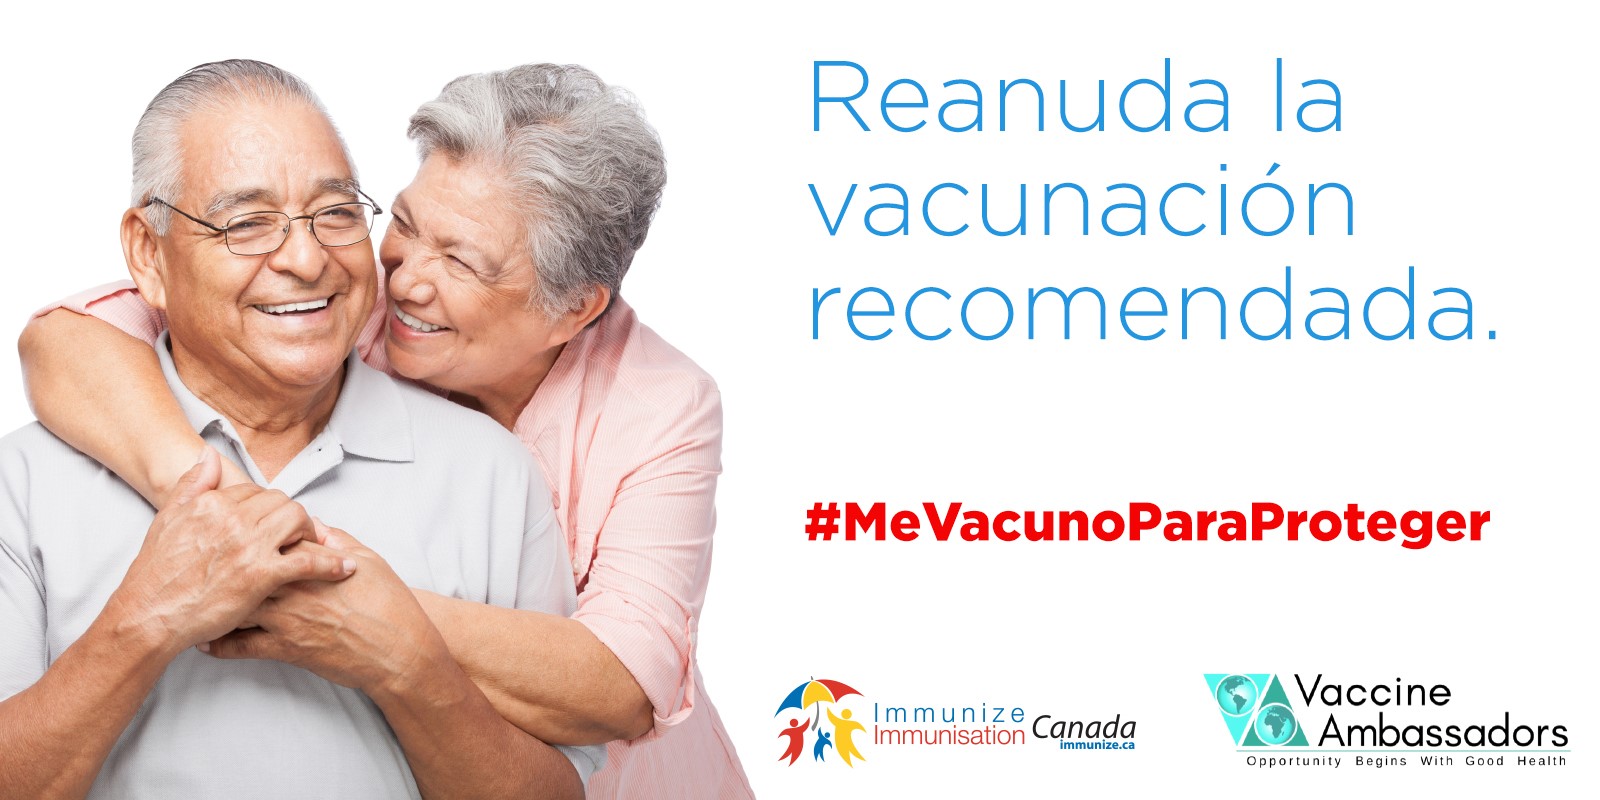 Older adults: Get back on track with recommended vaccinations - Spanish